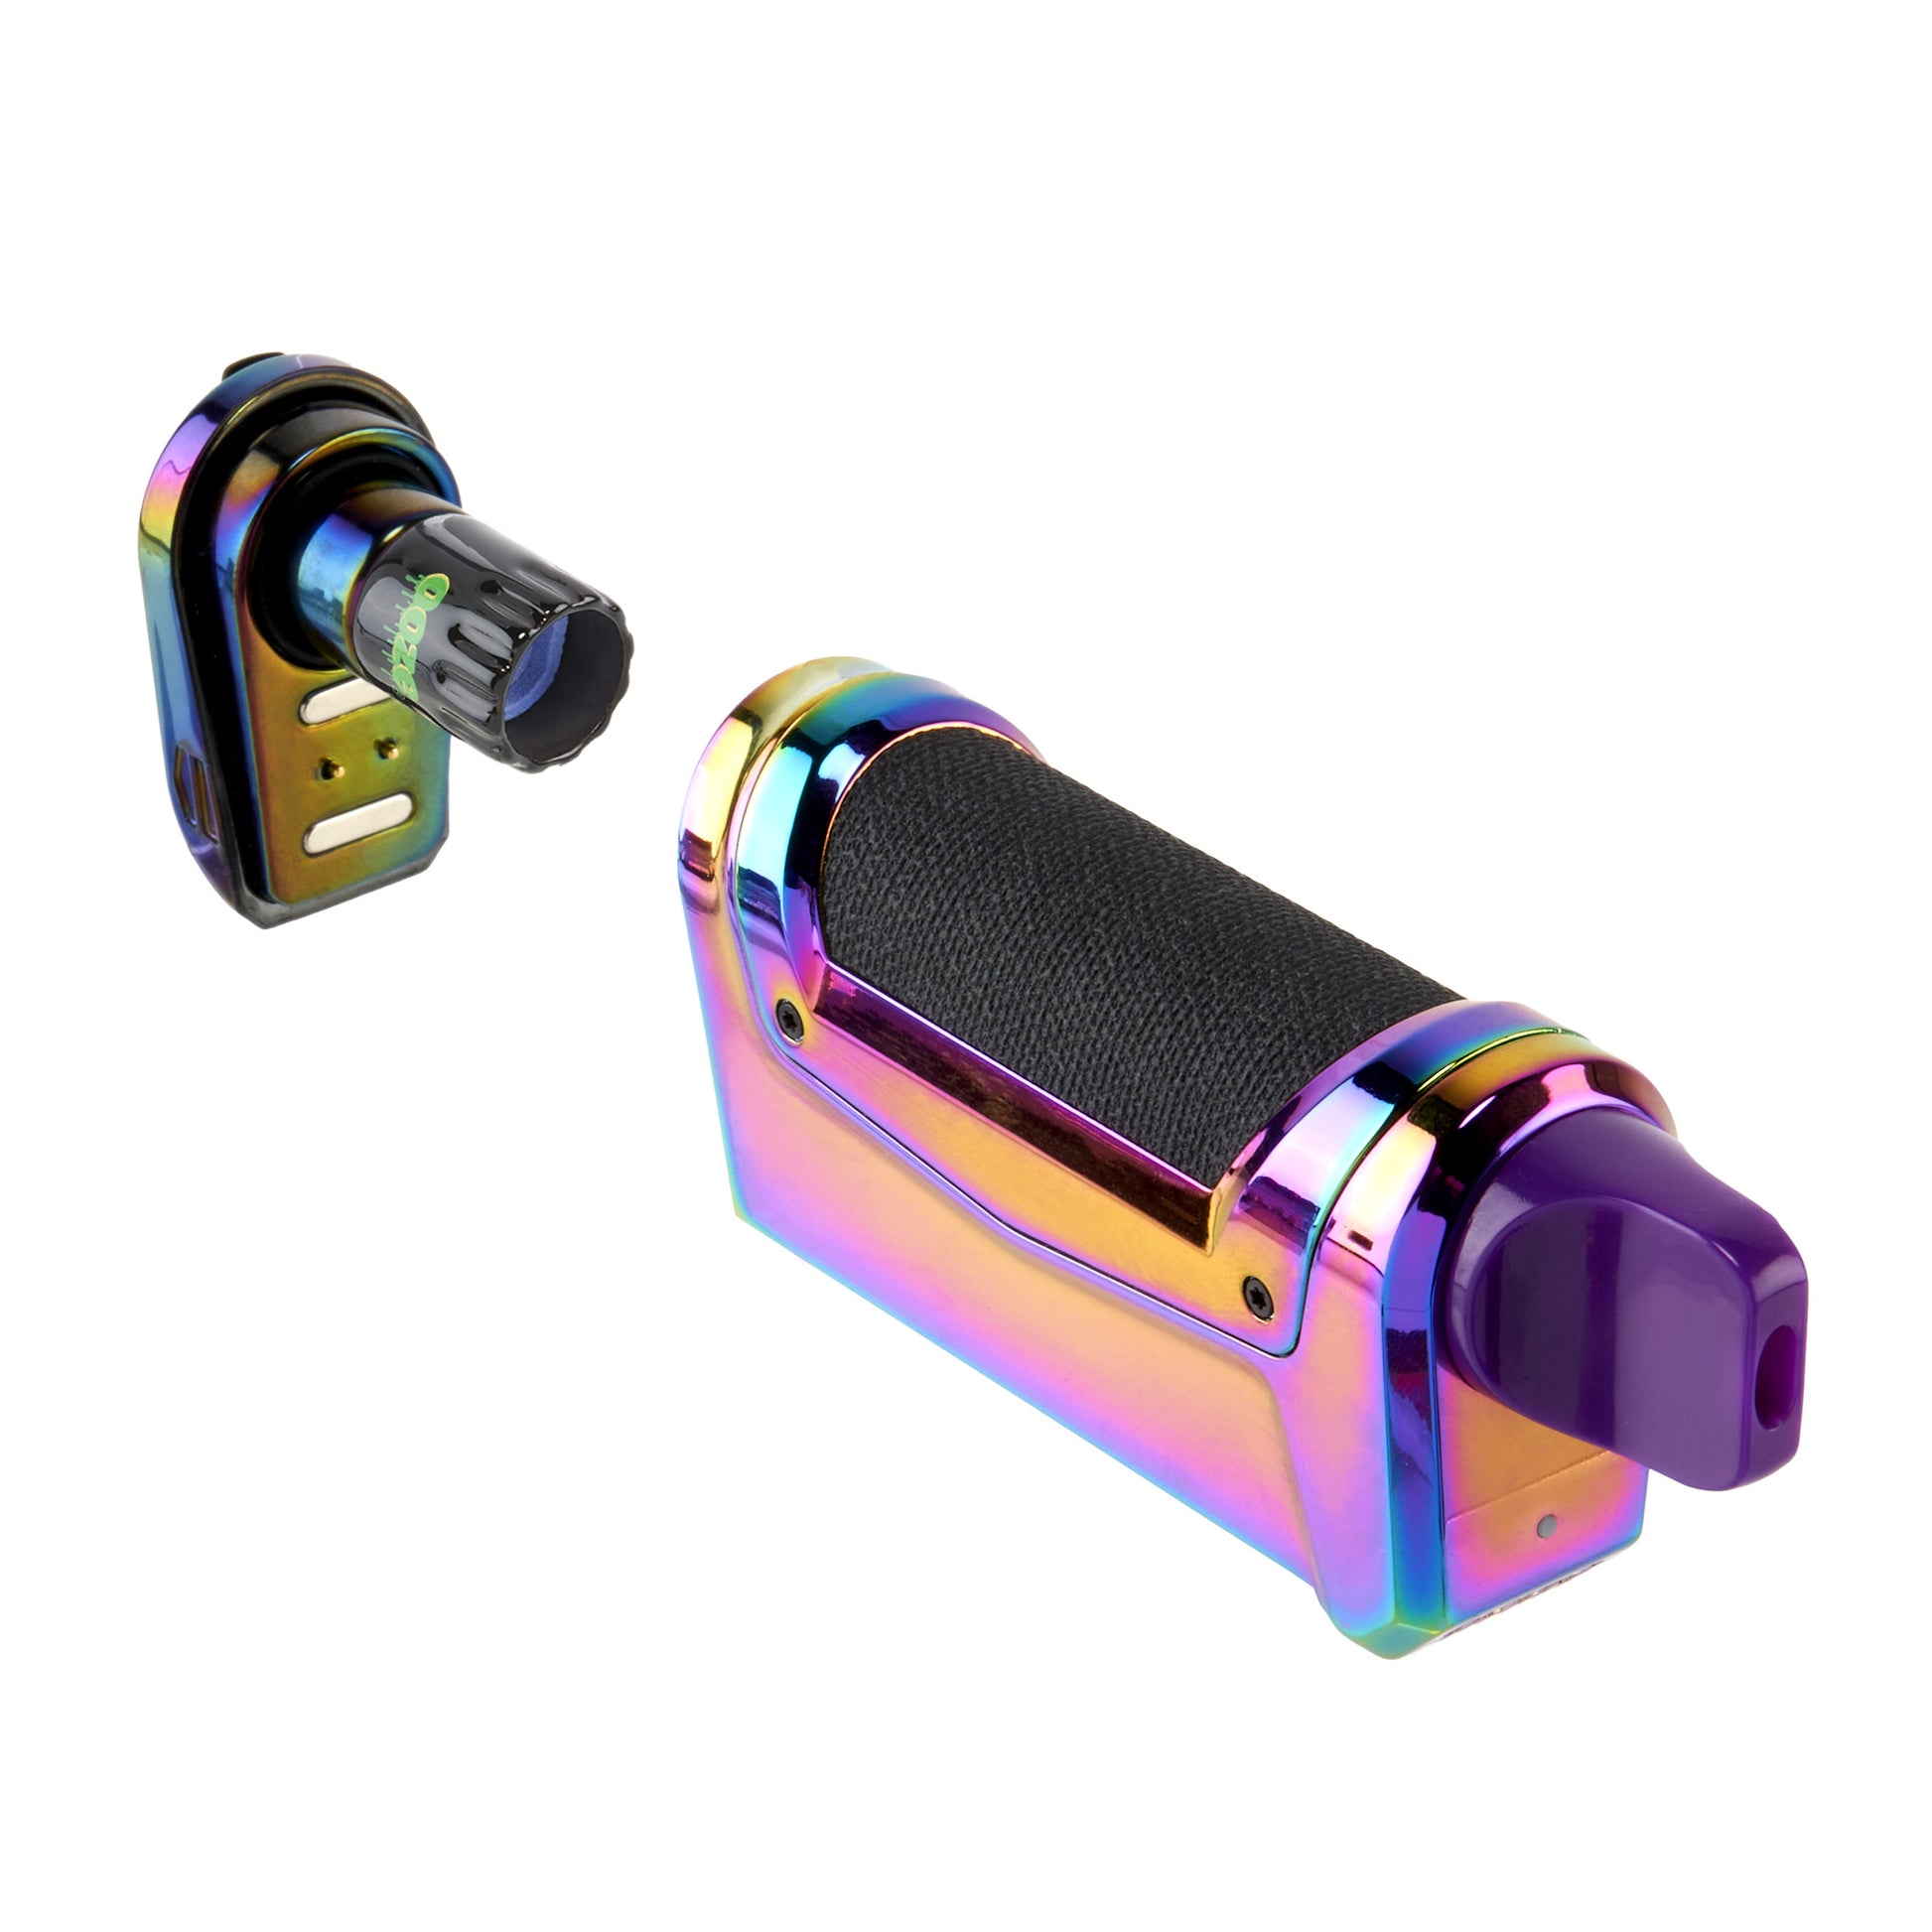 The rainbow Ooze Duplex 2 extract vape is shown on its side with the base removed to show the connected Onyx Atomizer